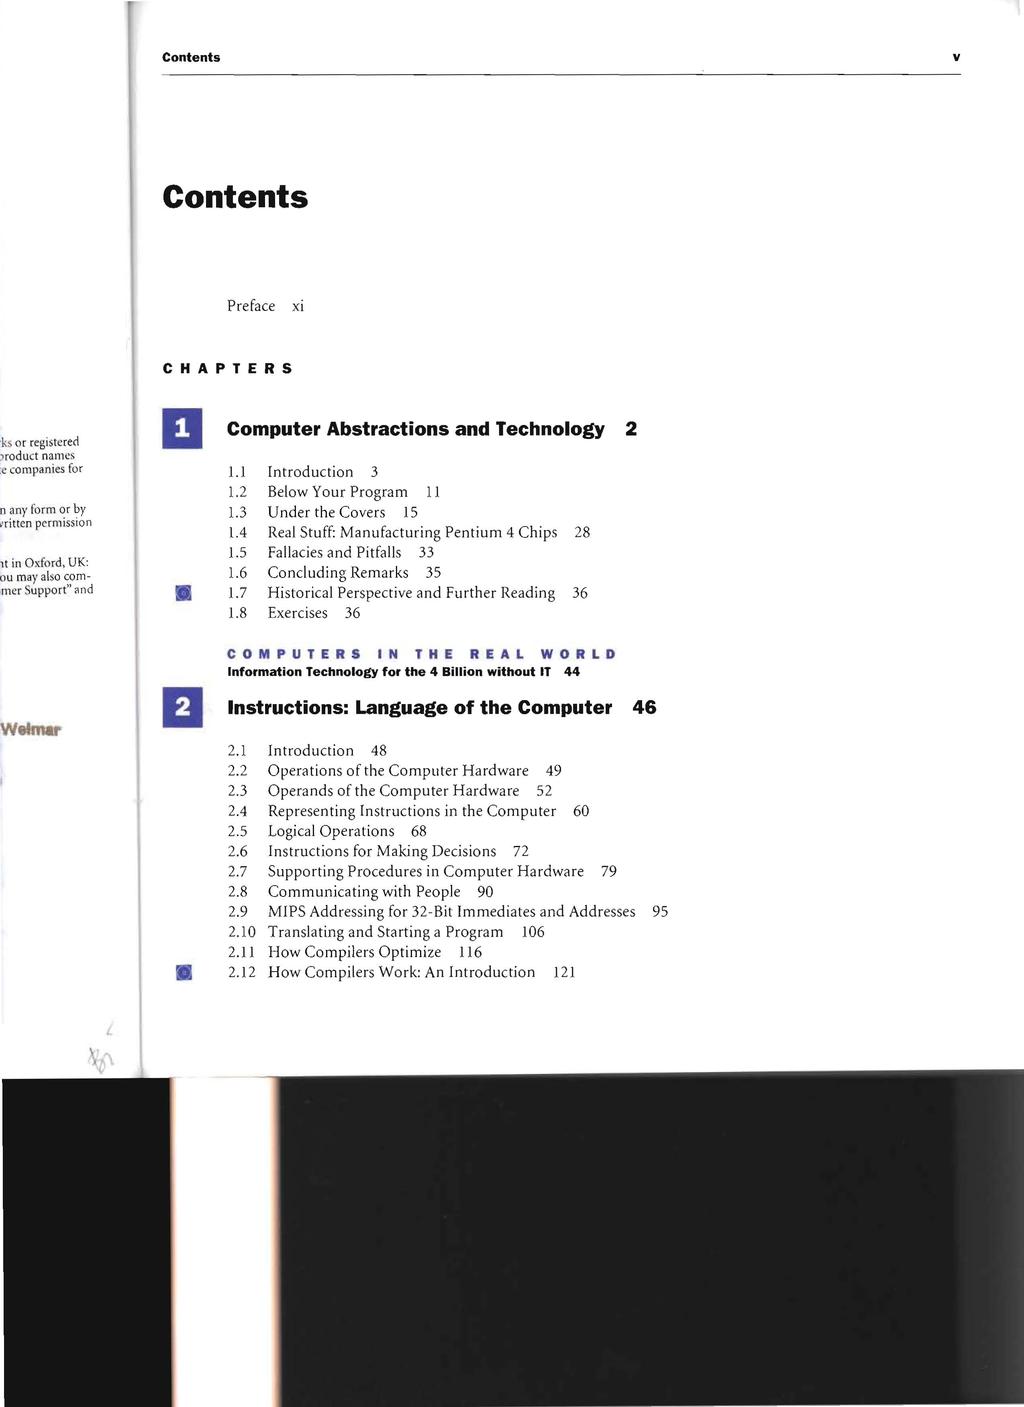 v Preface xi CHAPTERS Computer Abstractions and Technology 2 1.1 Introduction 3 1.2 Below Your Program 11 1. 3 Under the Covers 15 1.4 Real Stuff: Manufacturing Pentium 4 Chips 28 1.